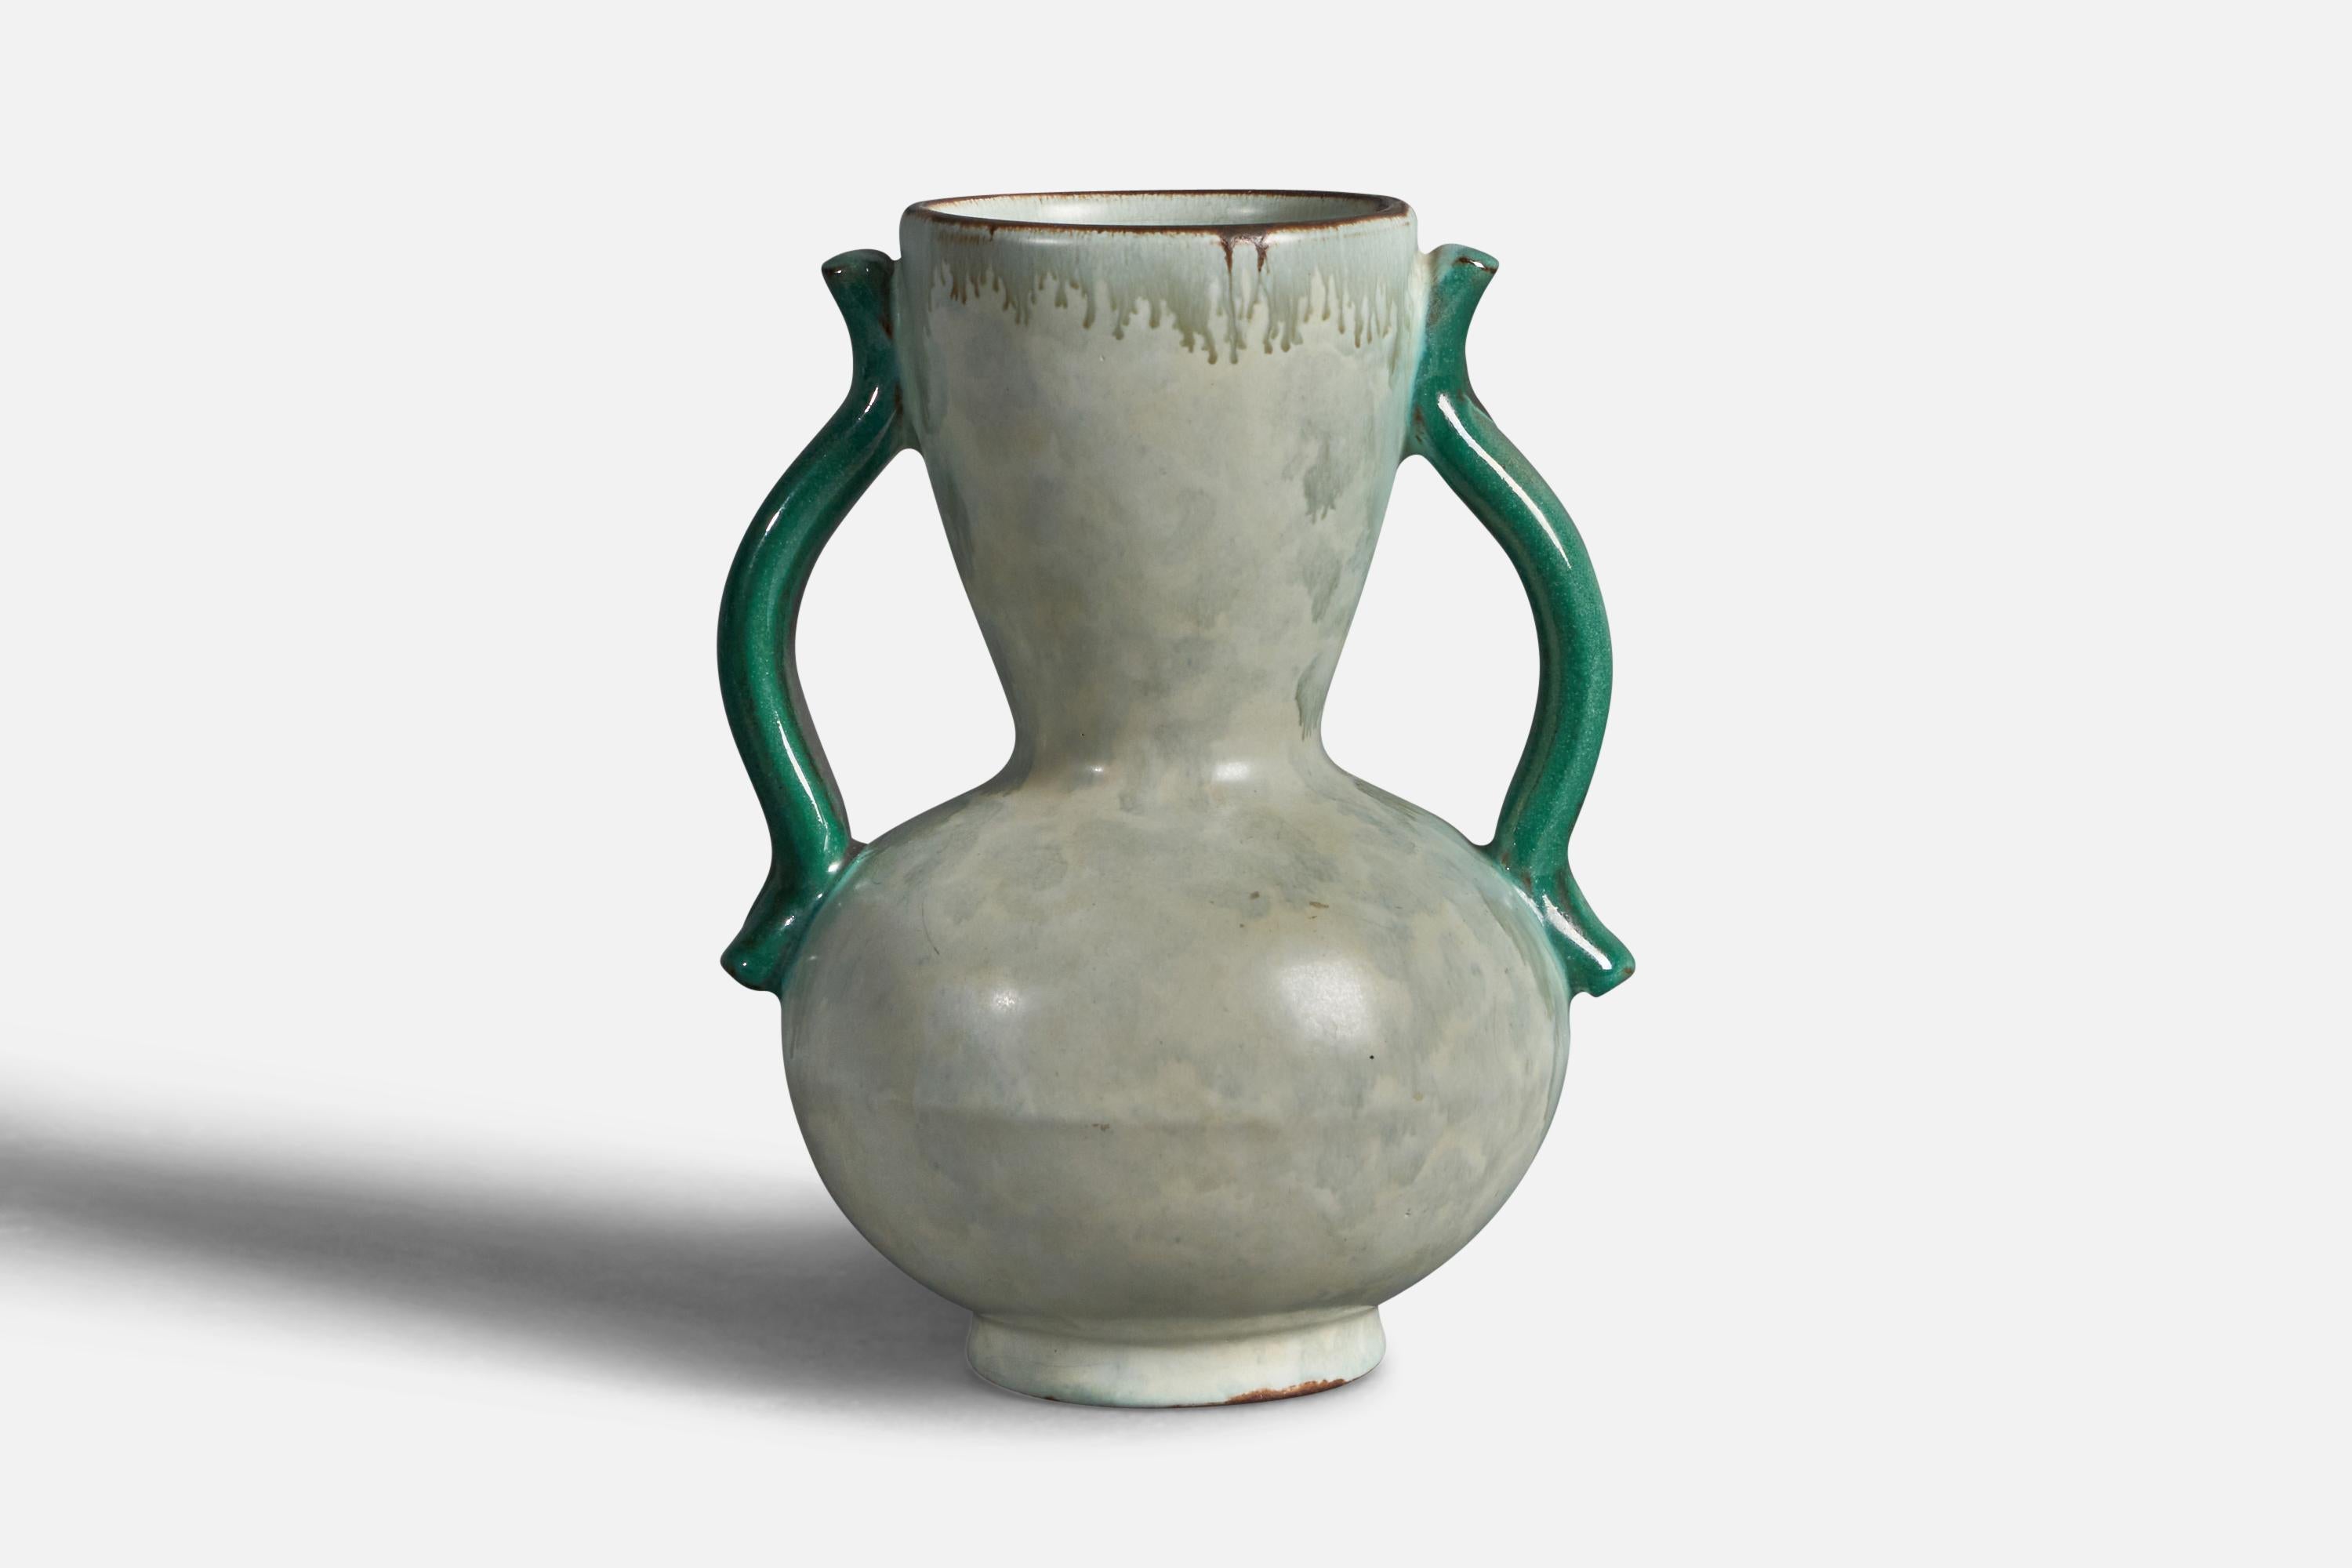 A white and green-glazed earthenware vase designed by Anna-Lisa Thomson and produced by Upsala Ekeby, Sweden, 1930s.